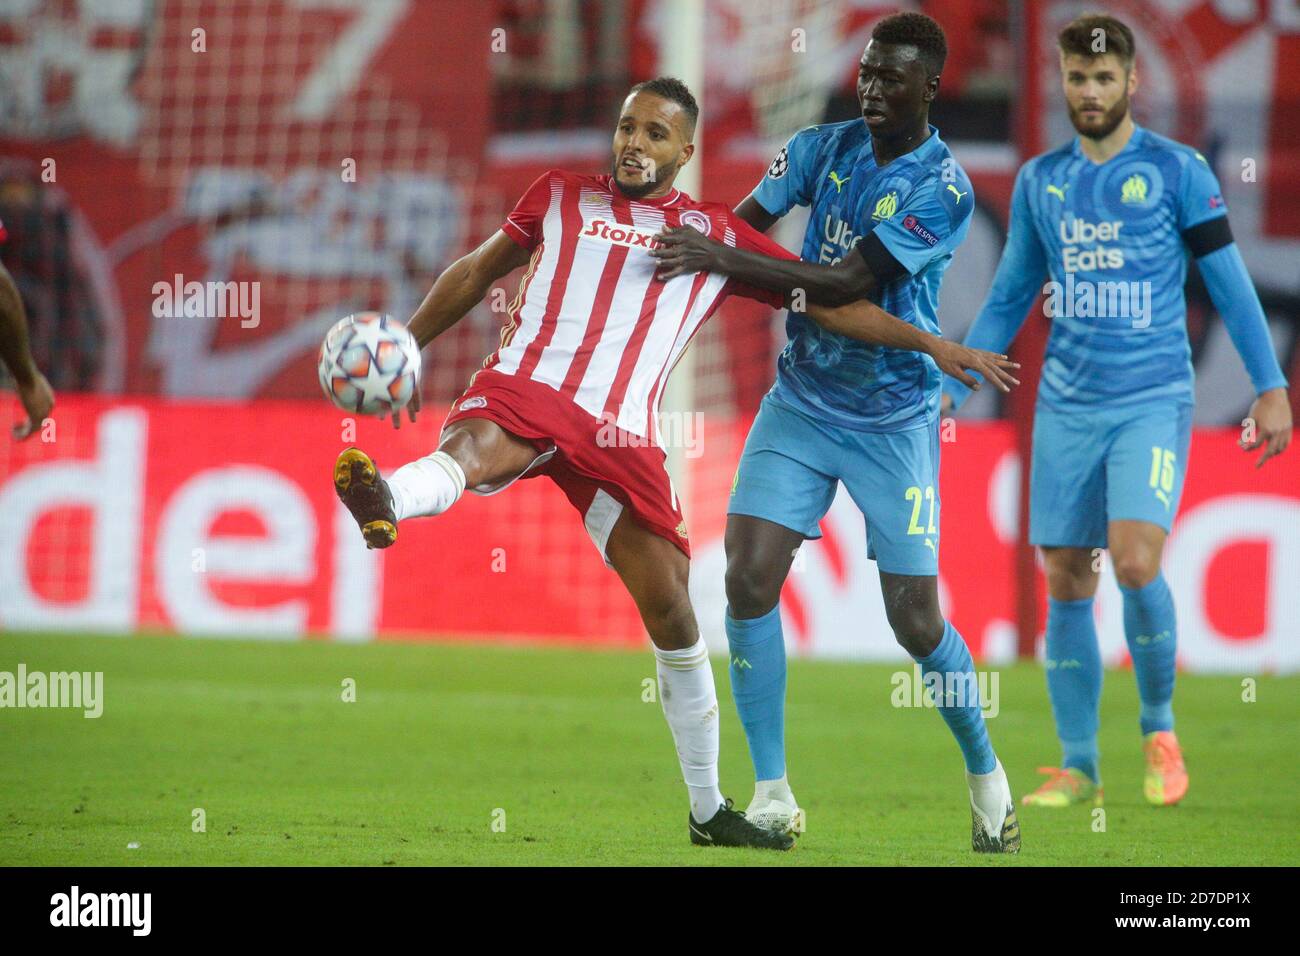 PIRAEUS, GREECE - OCTOBER 21: Youssef El-Arabi of Olympiacos FC controls  the ball in front of Pape Gueye of Olympique de Marseille during the UEFA  Champions League Group C stage match between